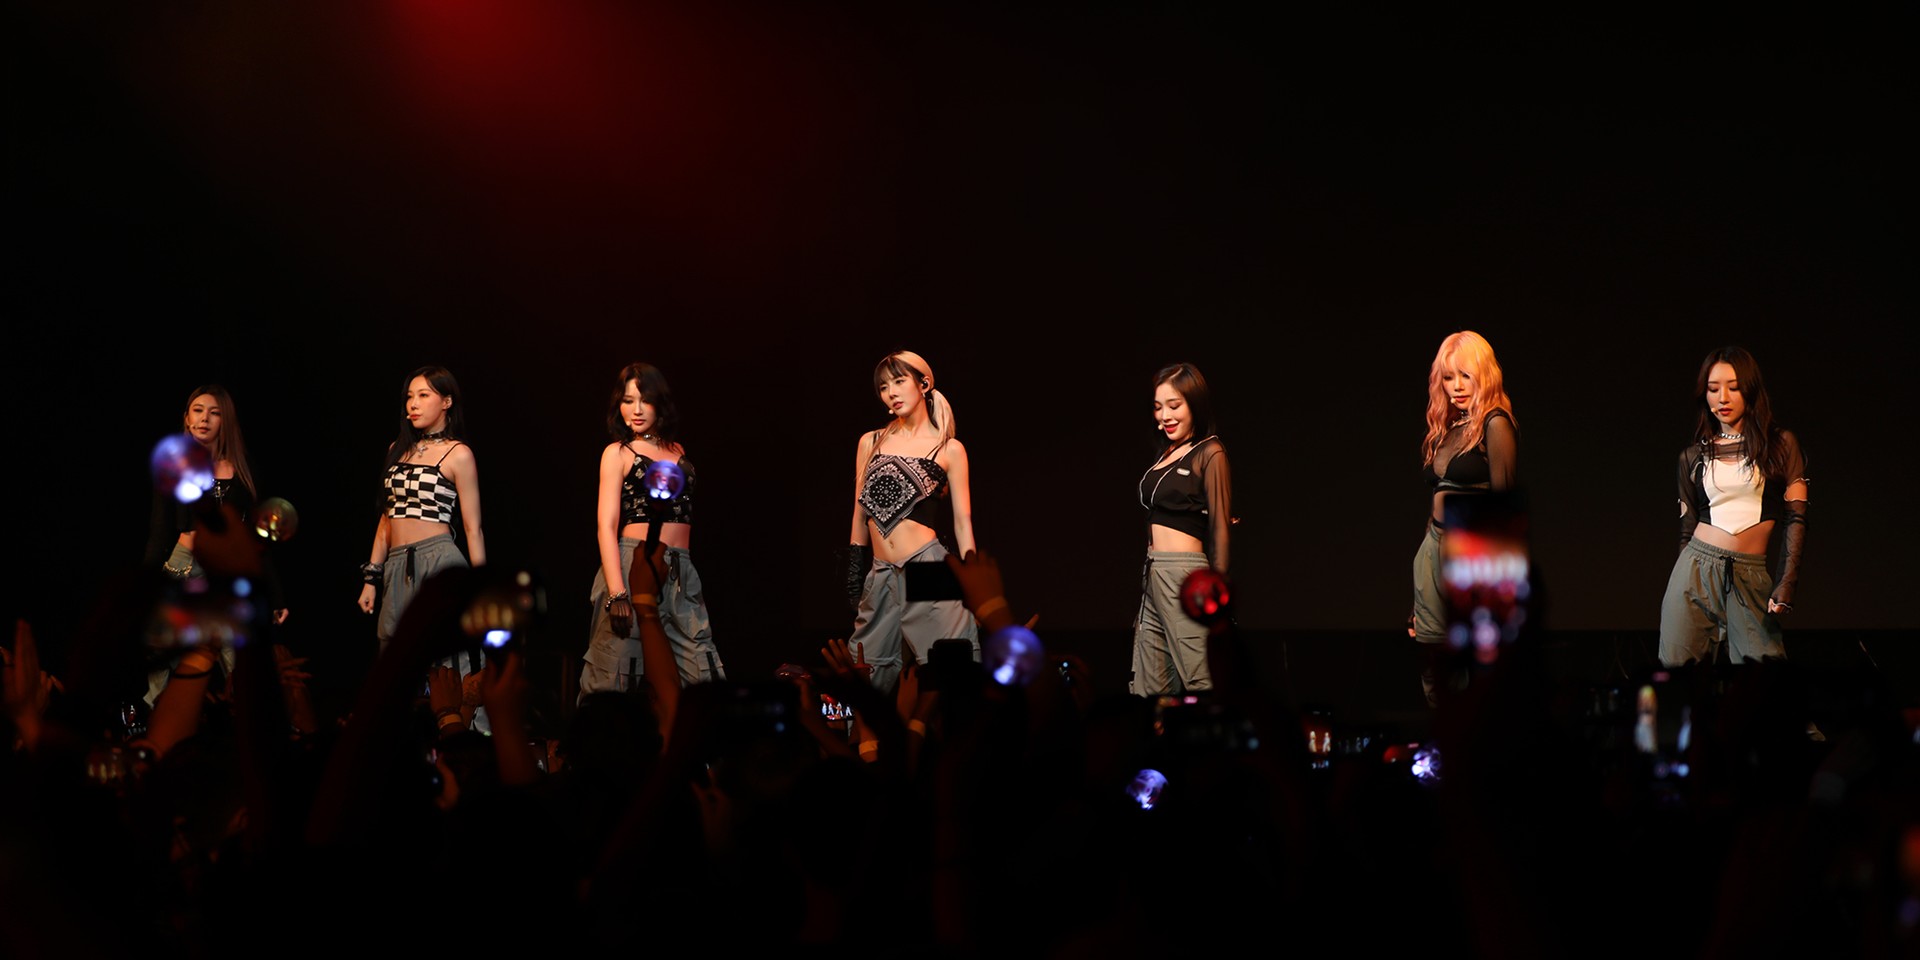 Dreamcatcher kick off US tour with sold-out show in New York